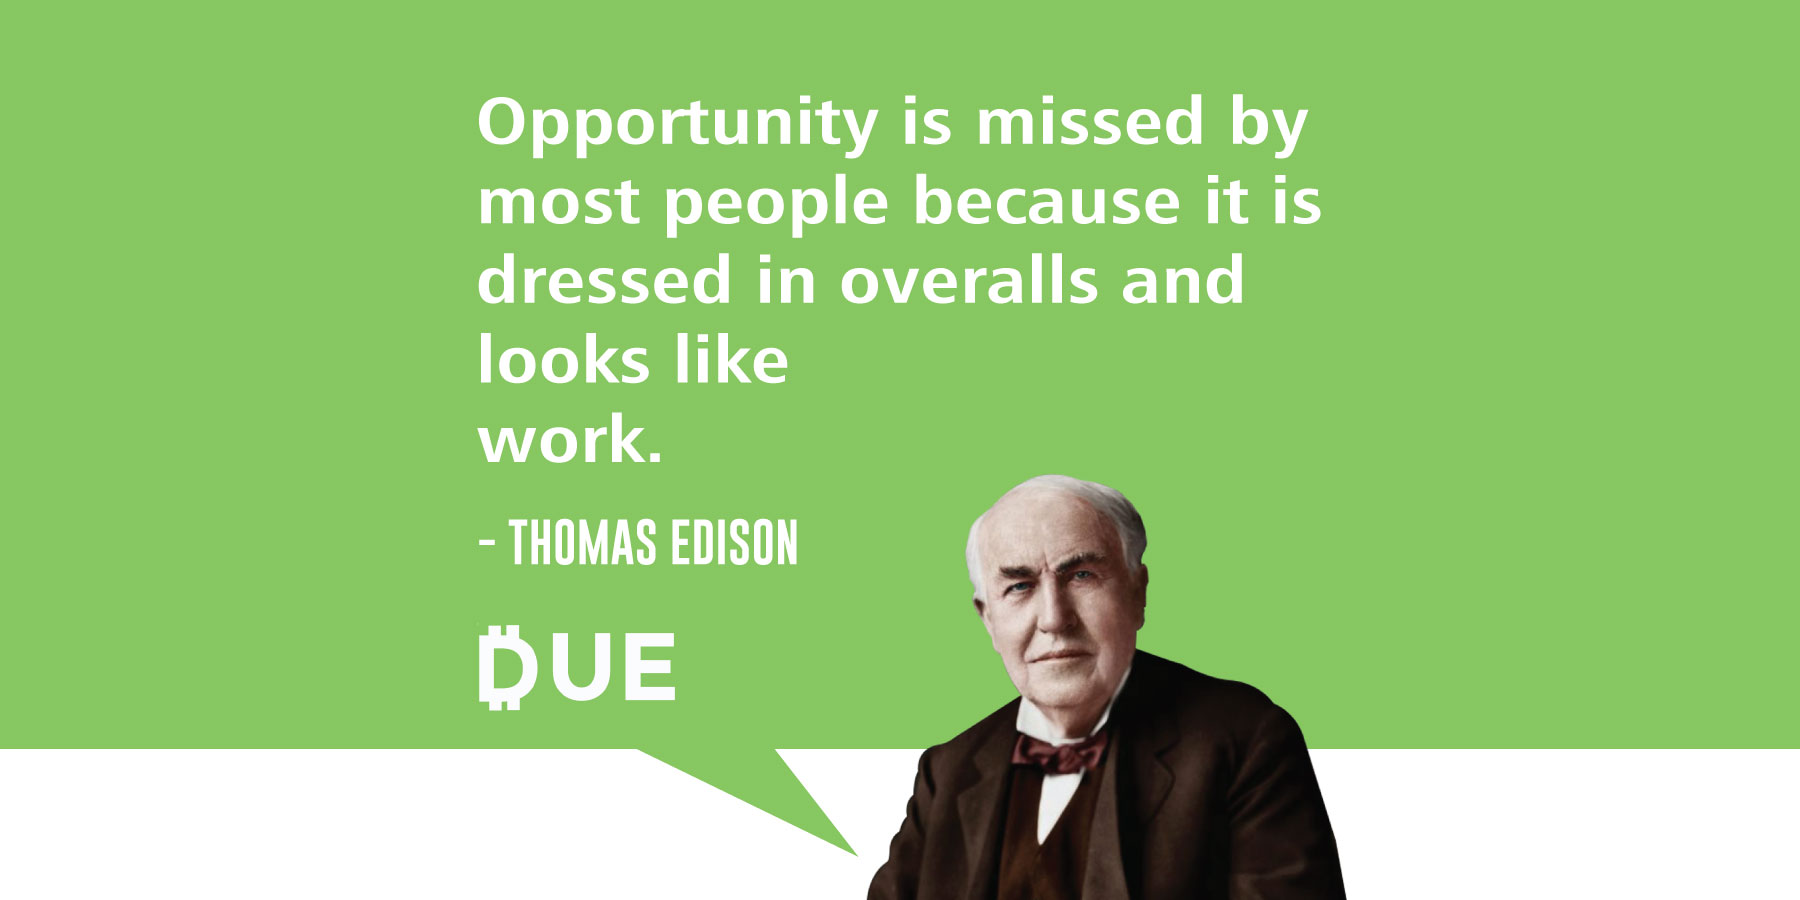 Thomas Edison - Don't Miss An Opportunity